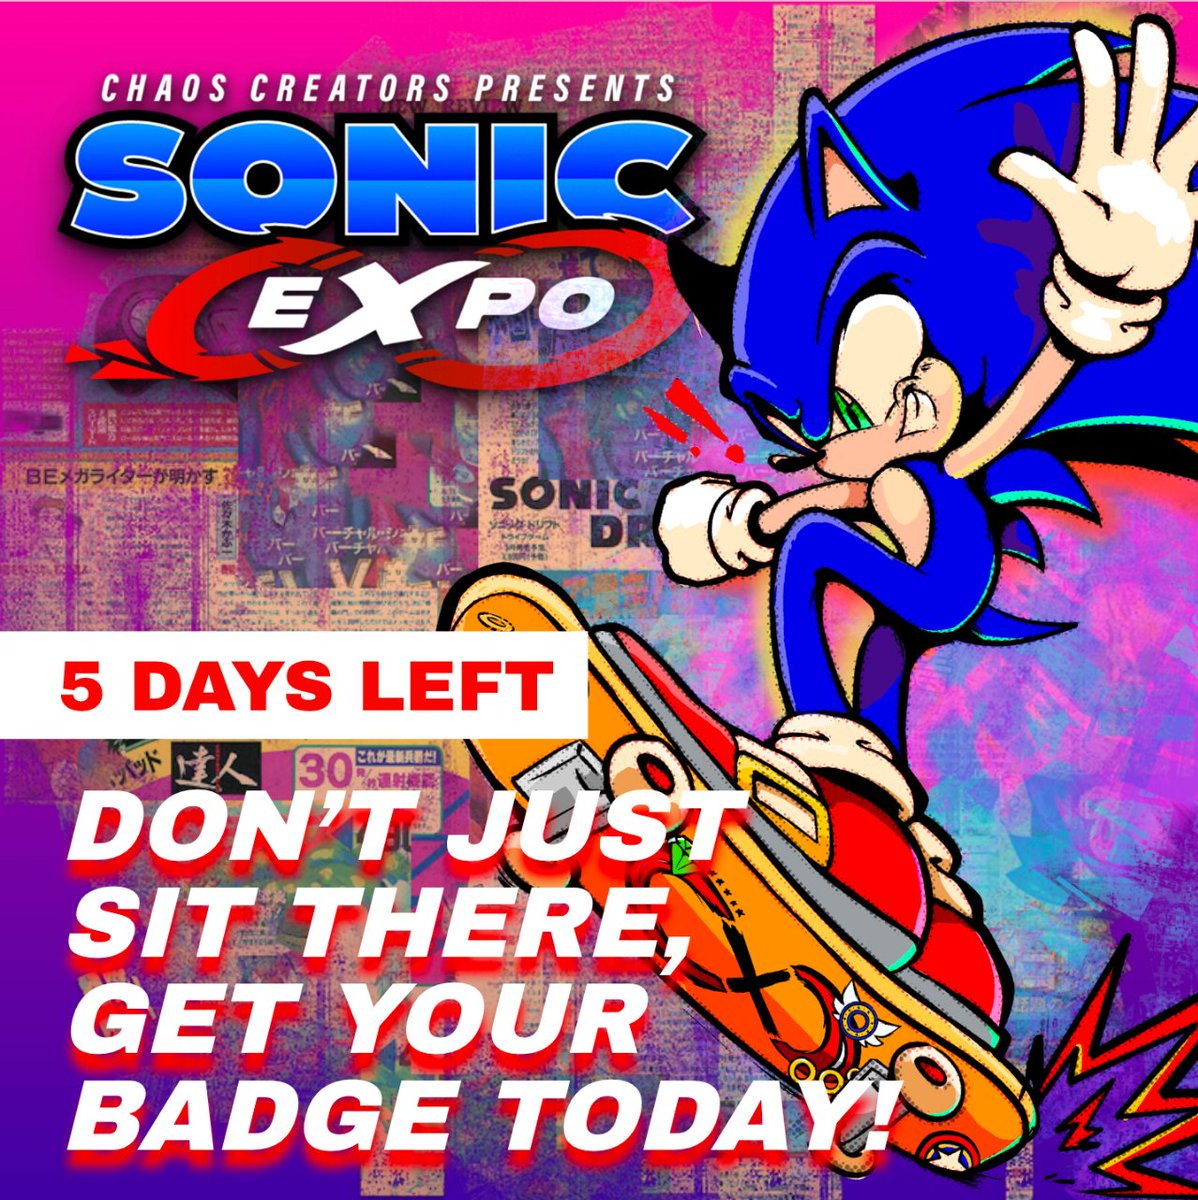 Time to act fast! Our kickstarter will be ending in 5 days!  What are you waiting for? Grab your badge and check out our limited tiers that have great collectibles! Link below